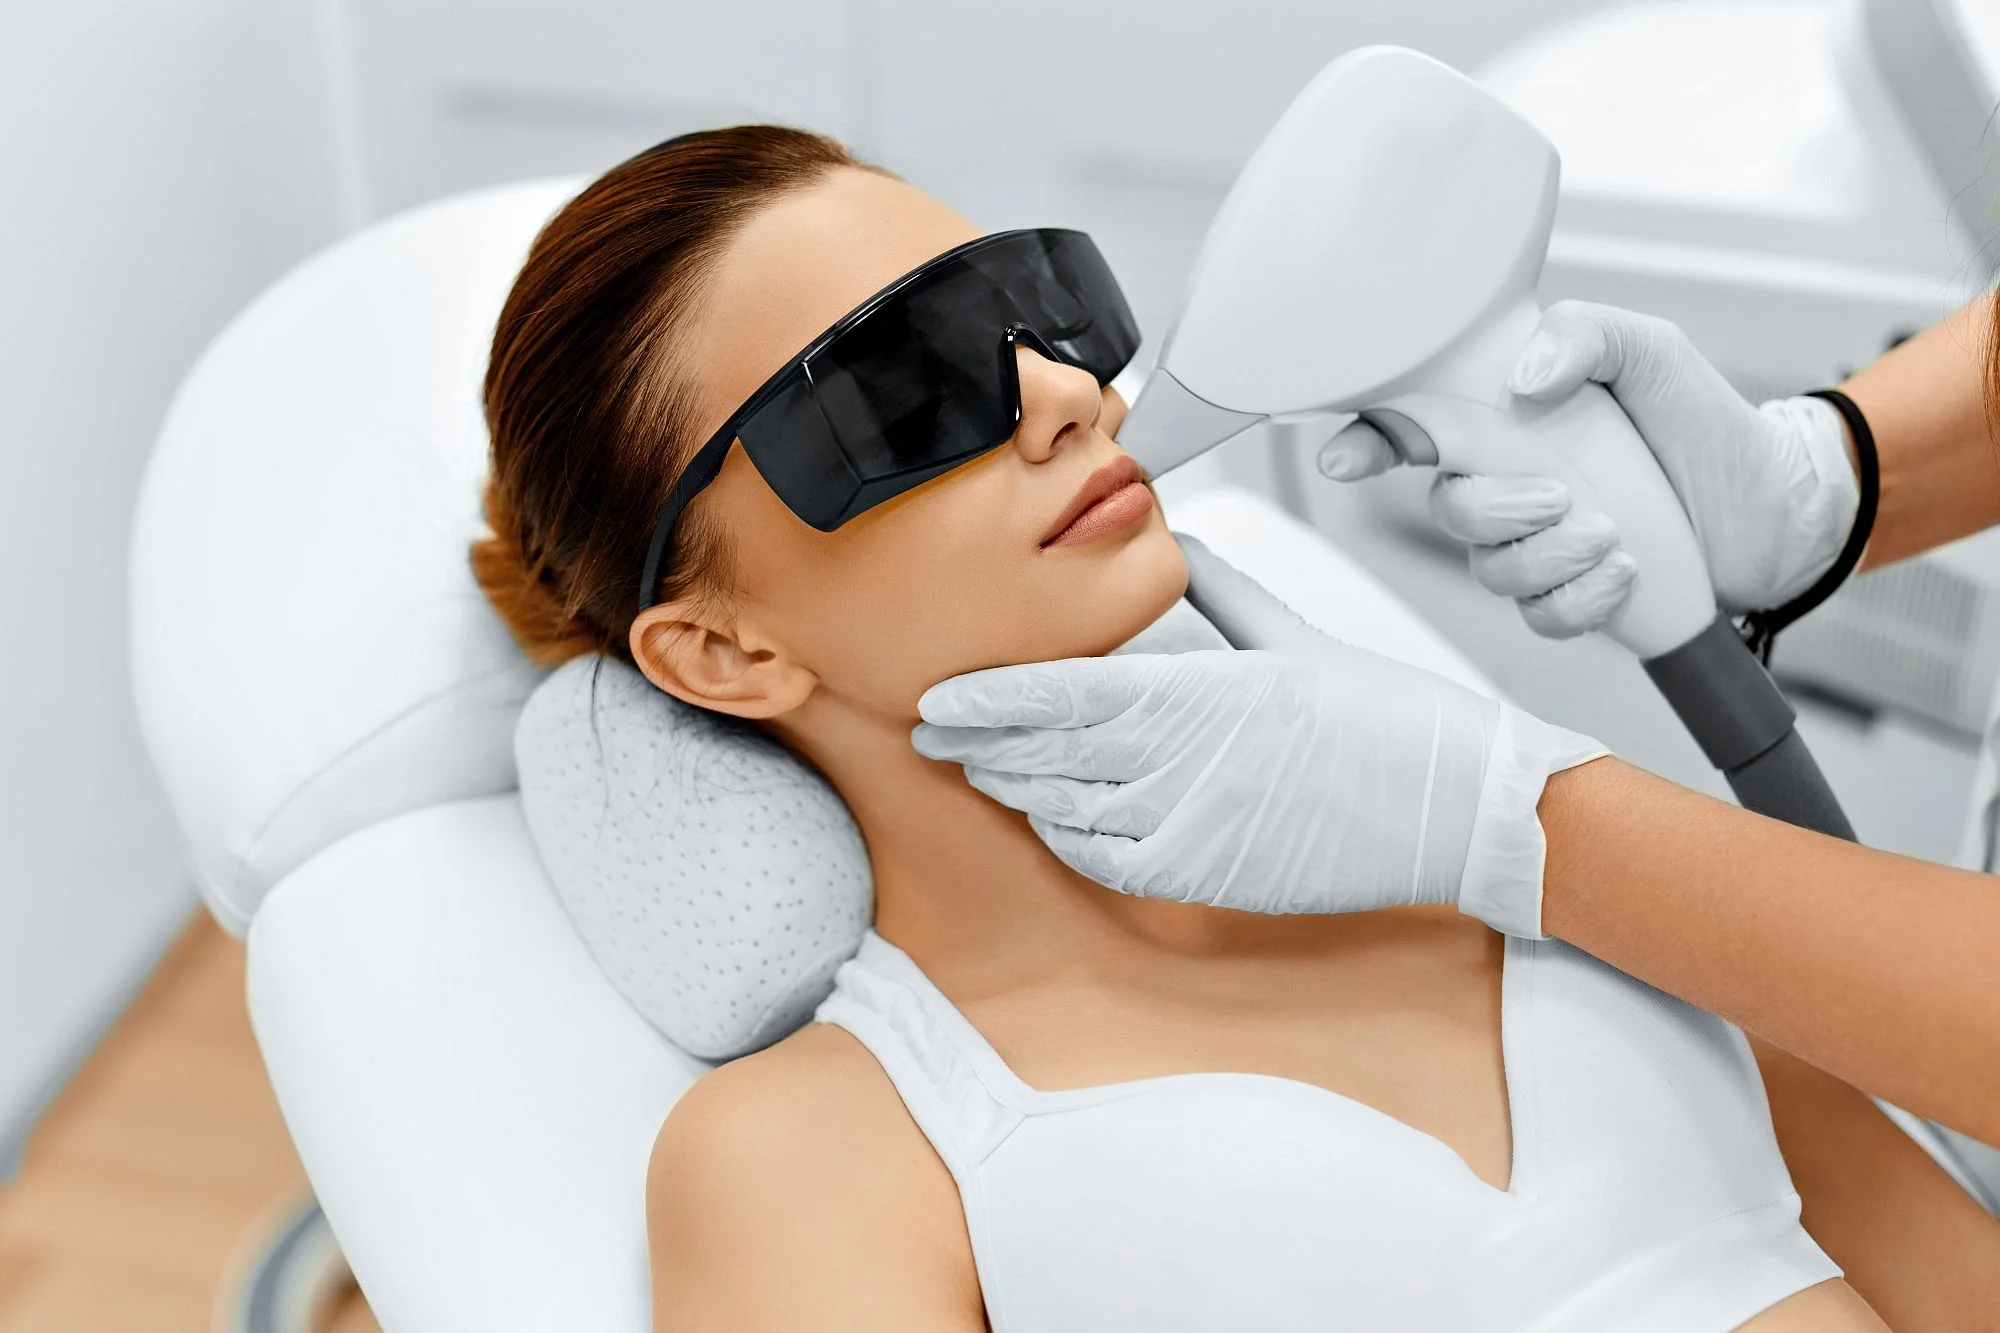 Laser Hair Removal in Colleyville, TX | Make You Well Family Practice & Aesthetics